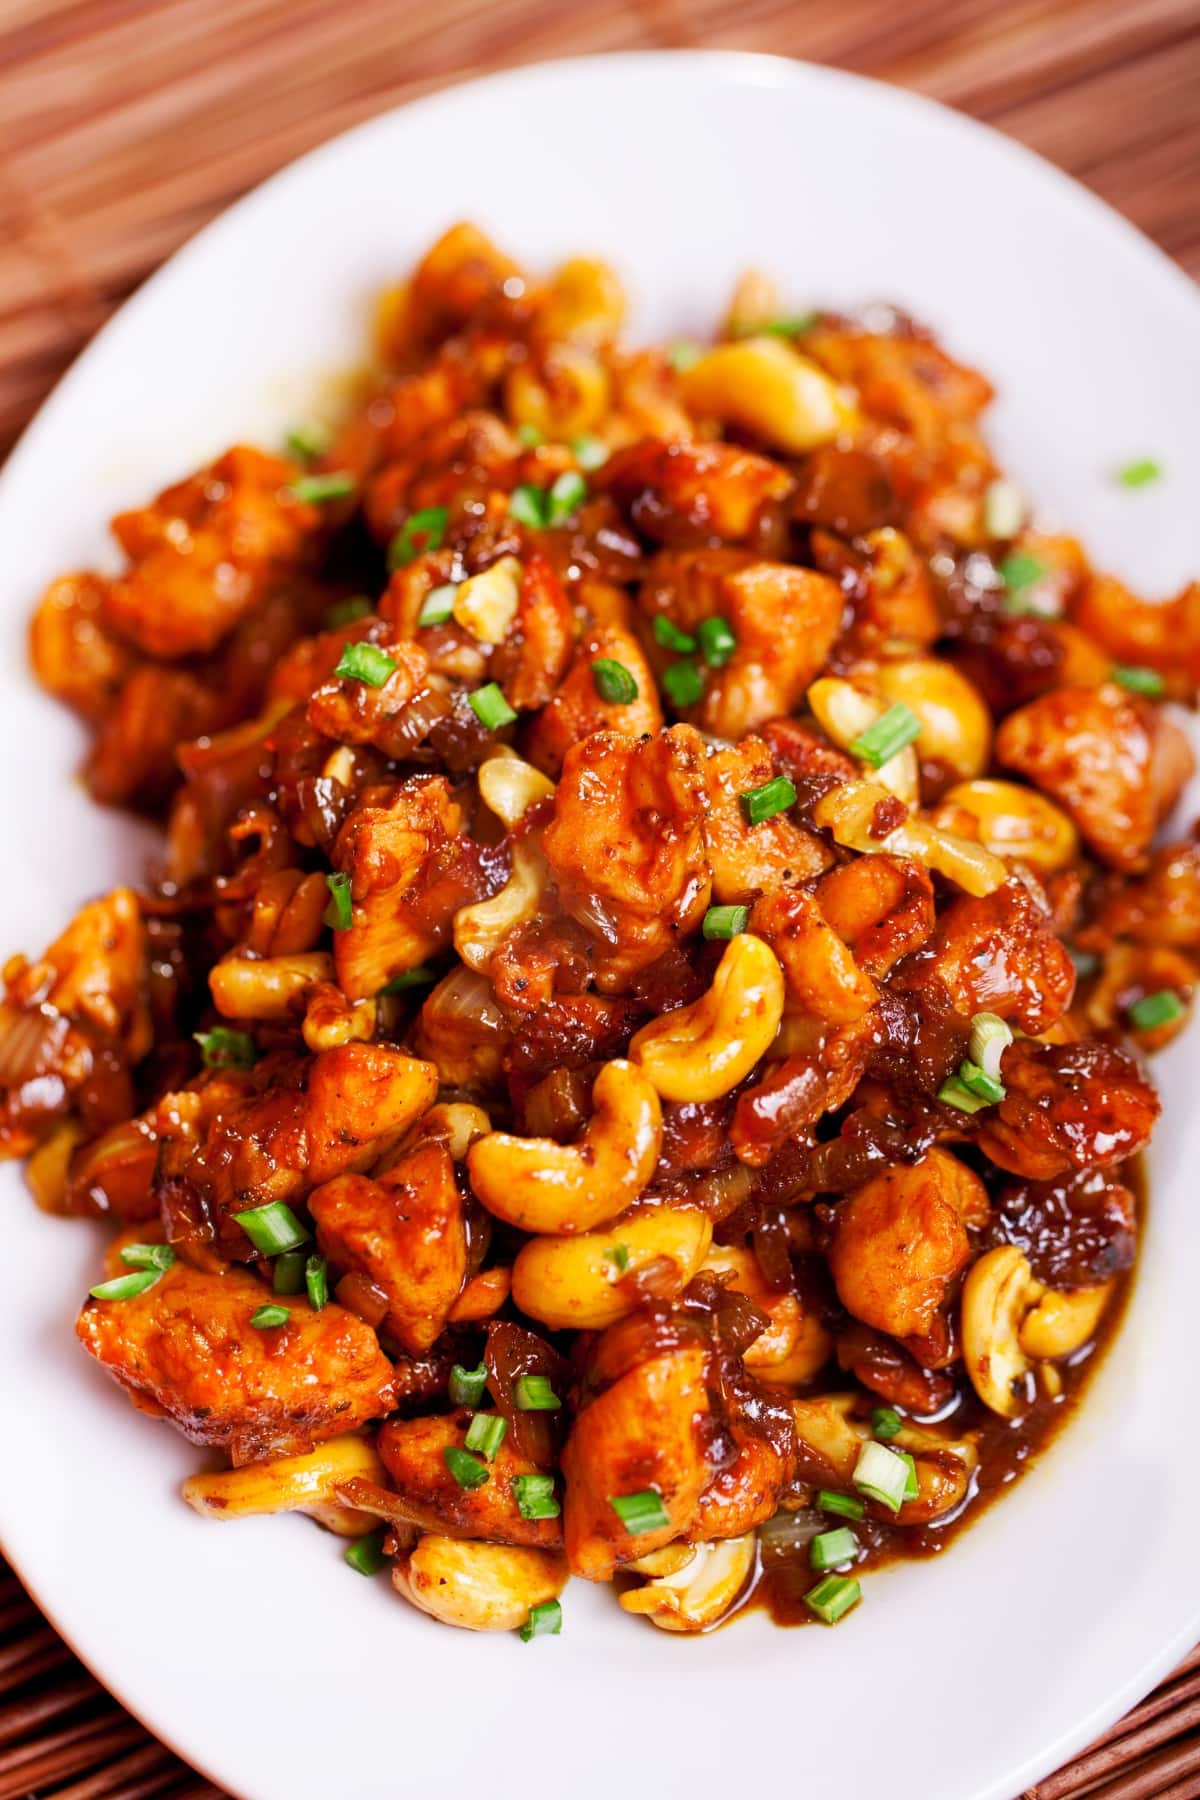 Savory and Flavorful Cashew Chicken in a Plate